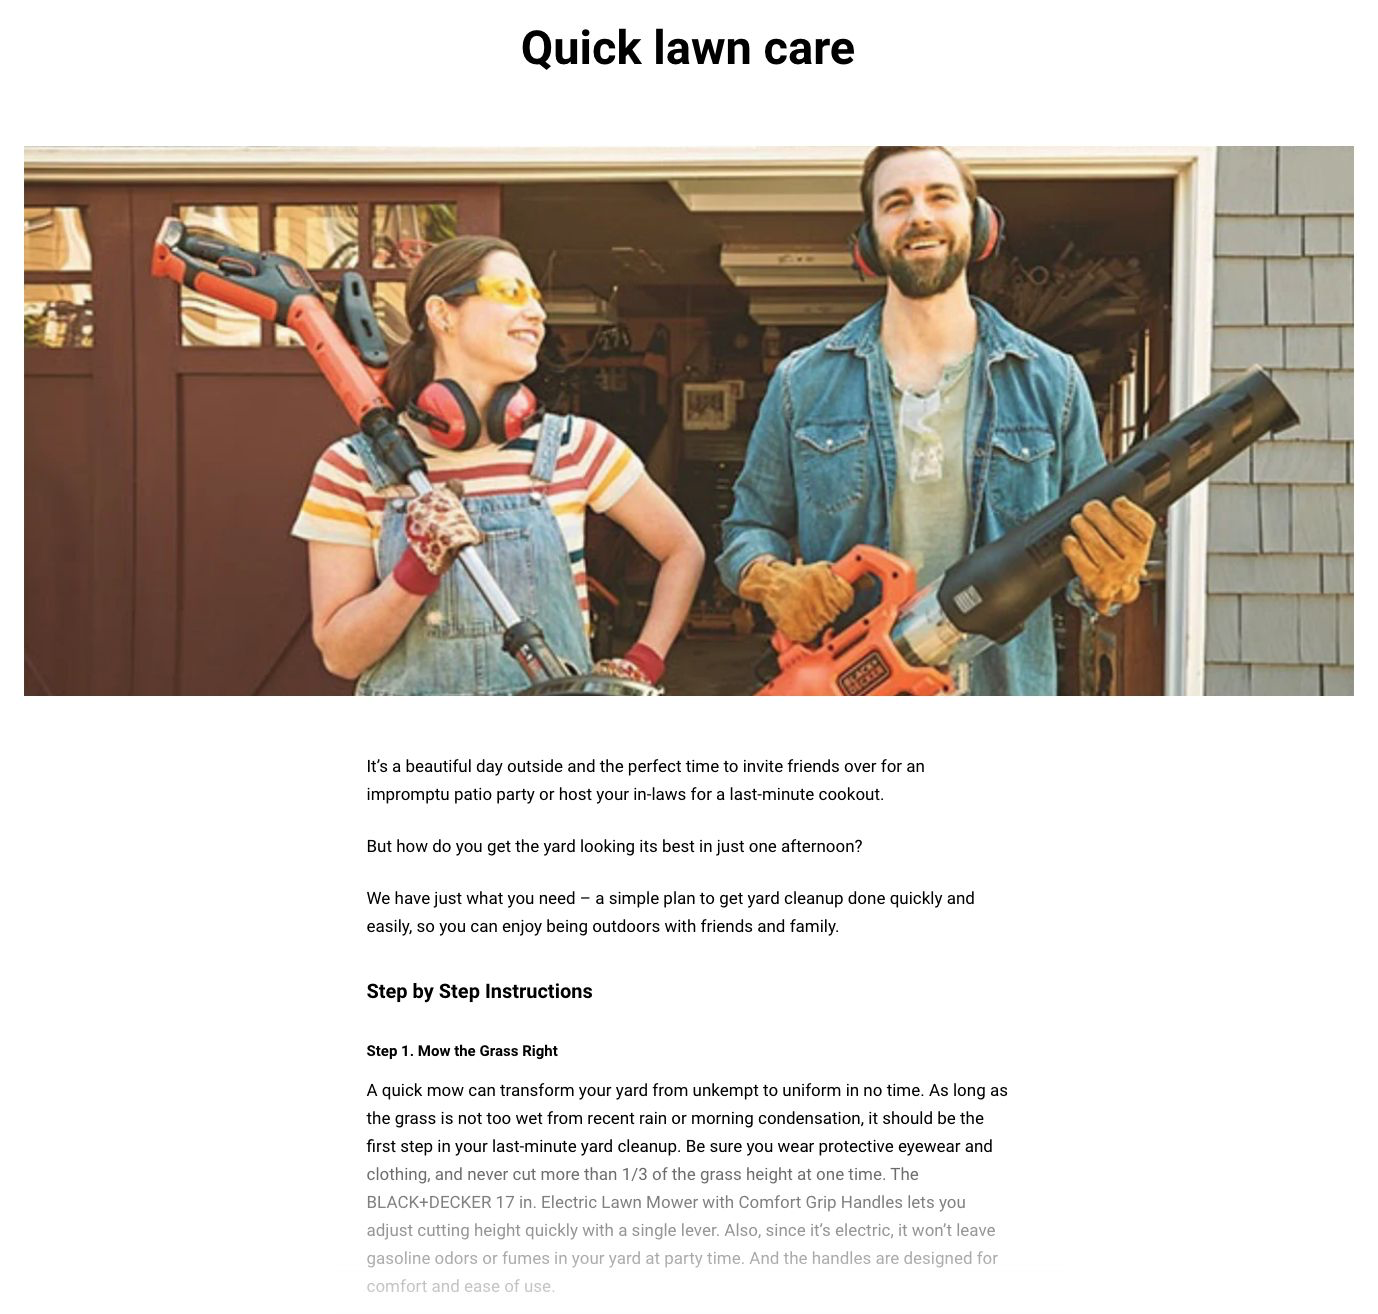 black and decker step-by-step blog post on quick lawn care